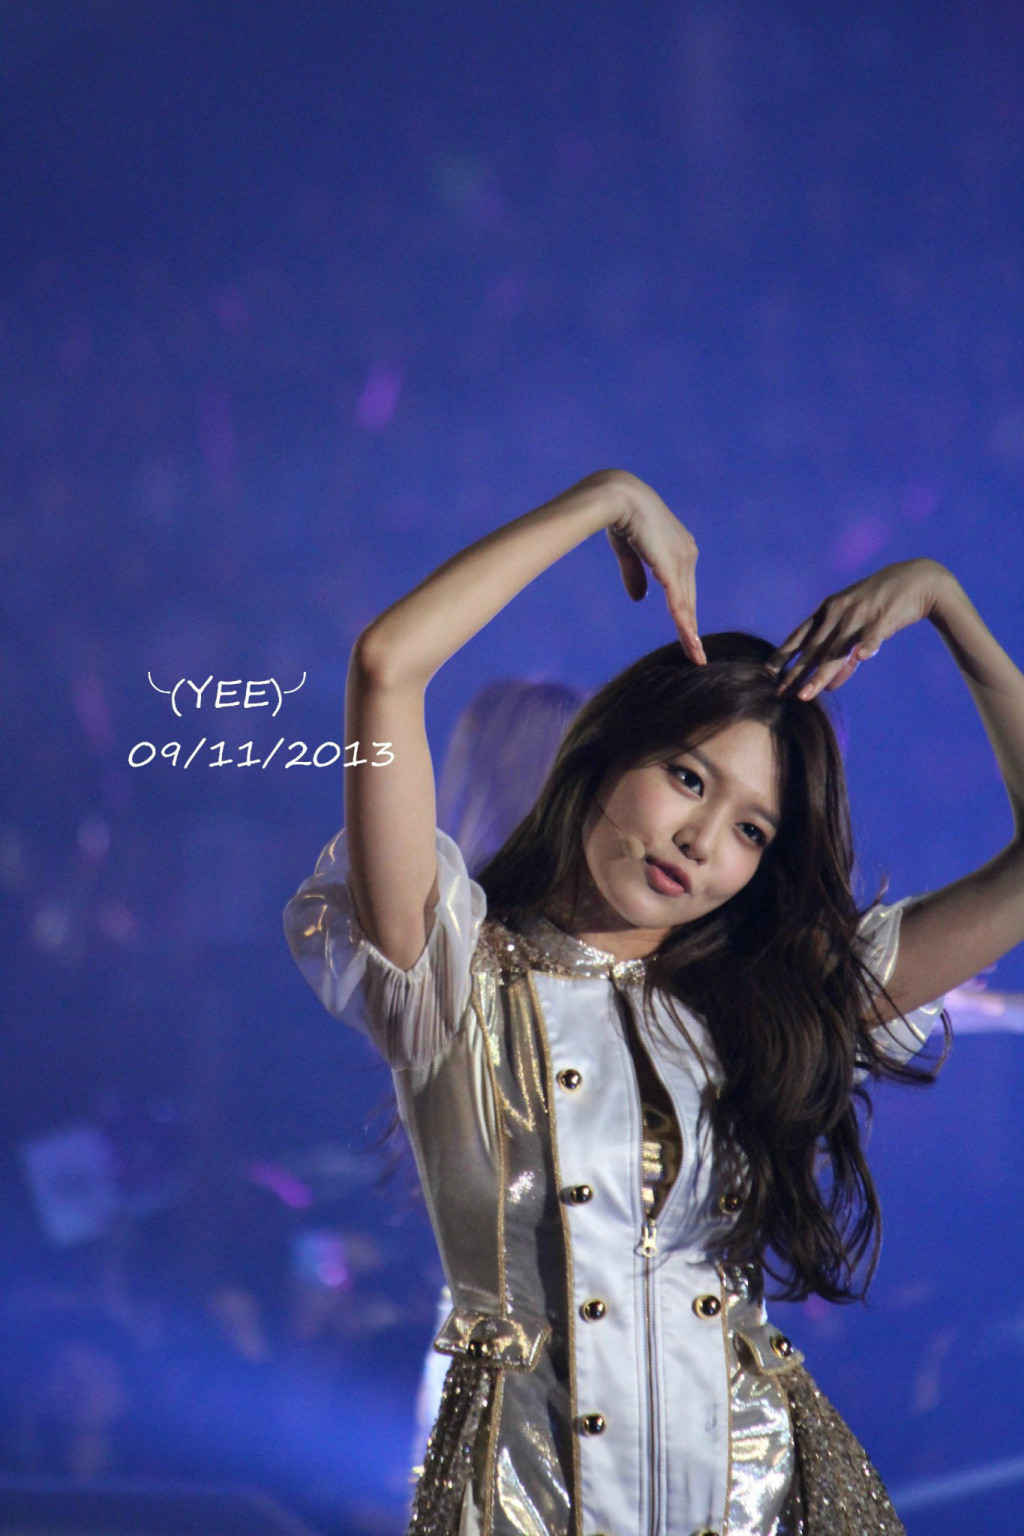 [SOOISM][VER 3] ☆ (¯`° CHOI SOOYOUNG °´¯) ☆ ► SOOYOUNGSTERS FAM ◄ ☆ ► WE <3 CHOI SHIKSHIN FOREVER ◄ ☆ - Page 3 Tumblr_mw0w2xcD7d1sewbc1o2_1280